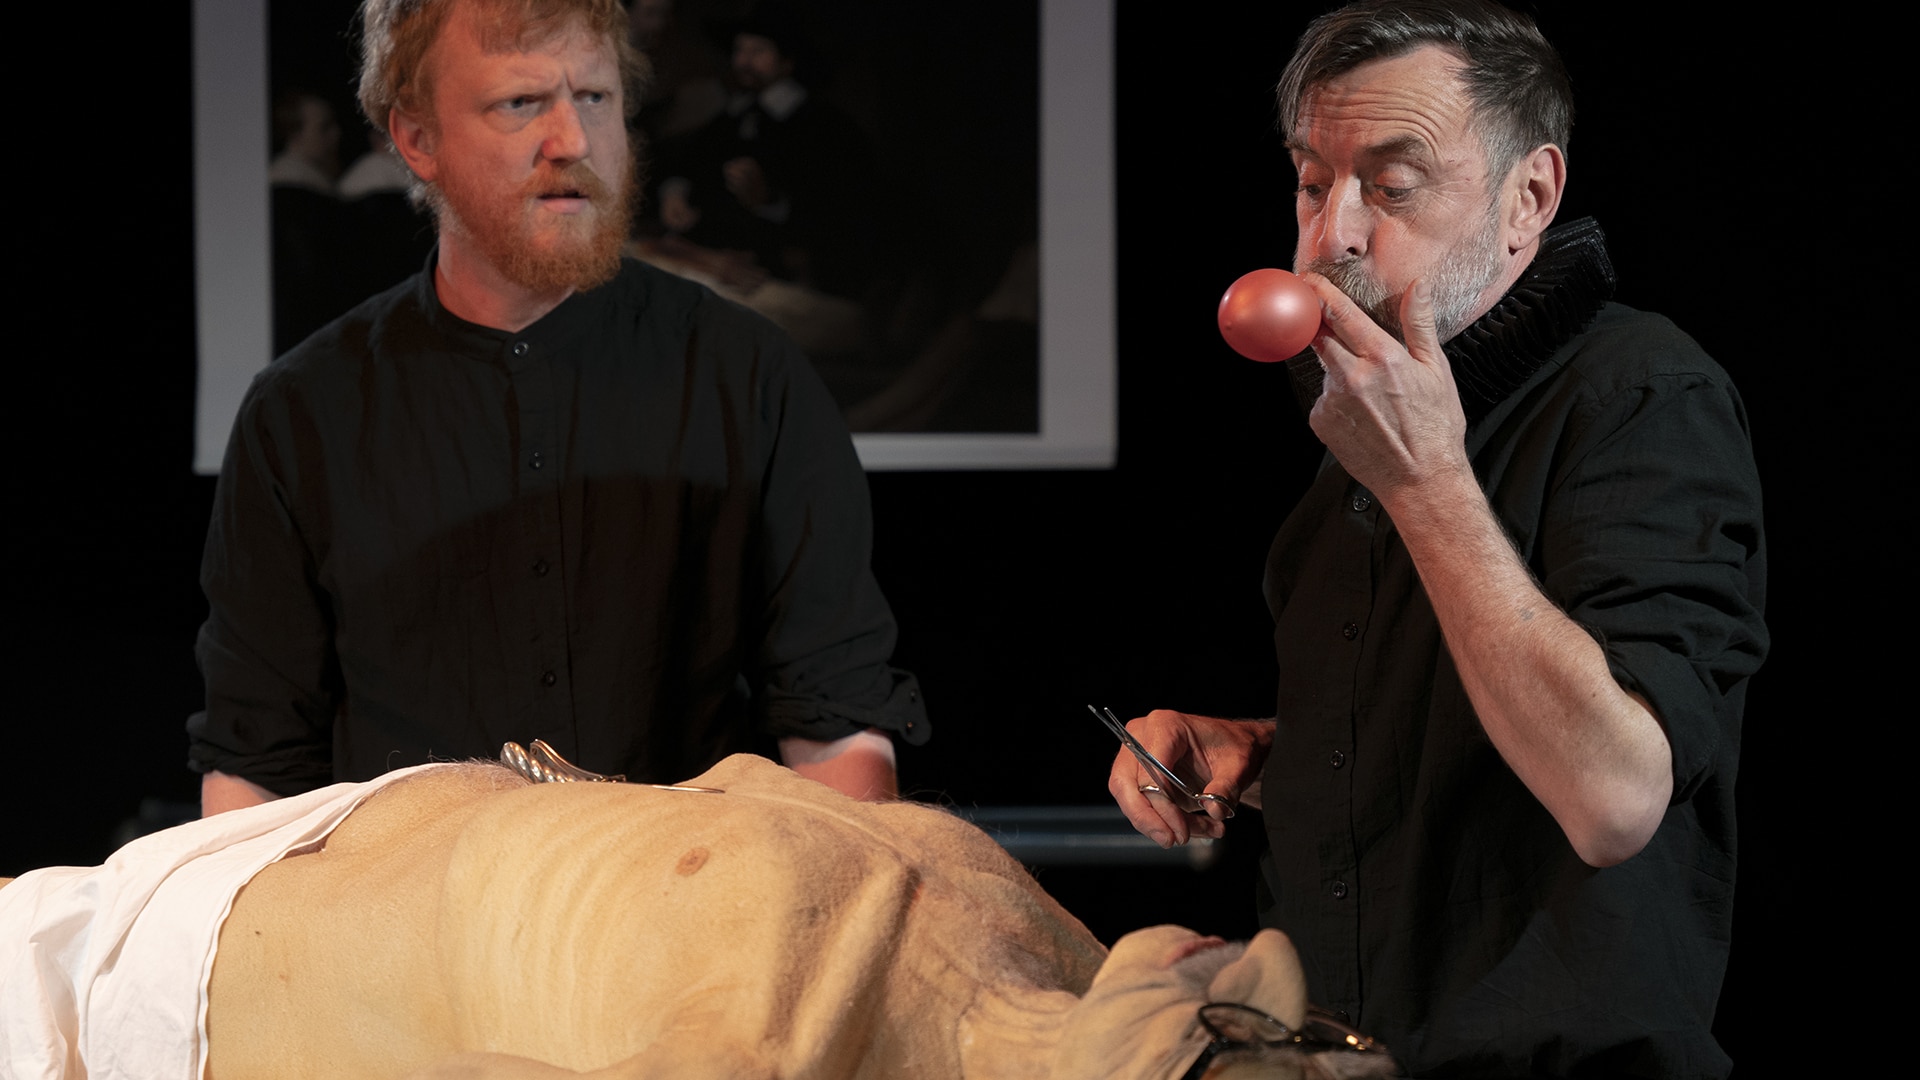 A body lies prone on a table. Dik Downey and Adam Blake stand over it. Adam watches Dik as he blows up a balloon while holding a pair of surgical scissors